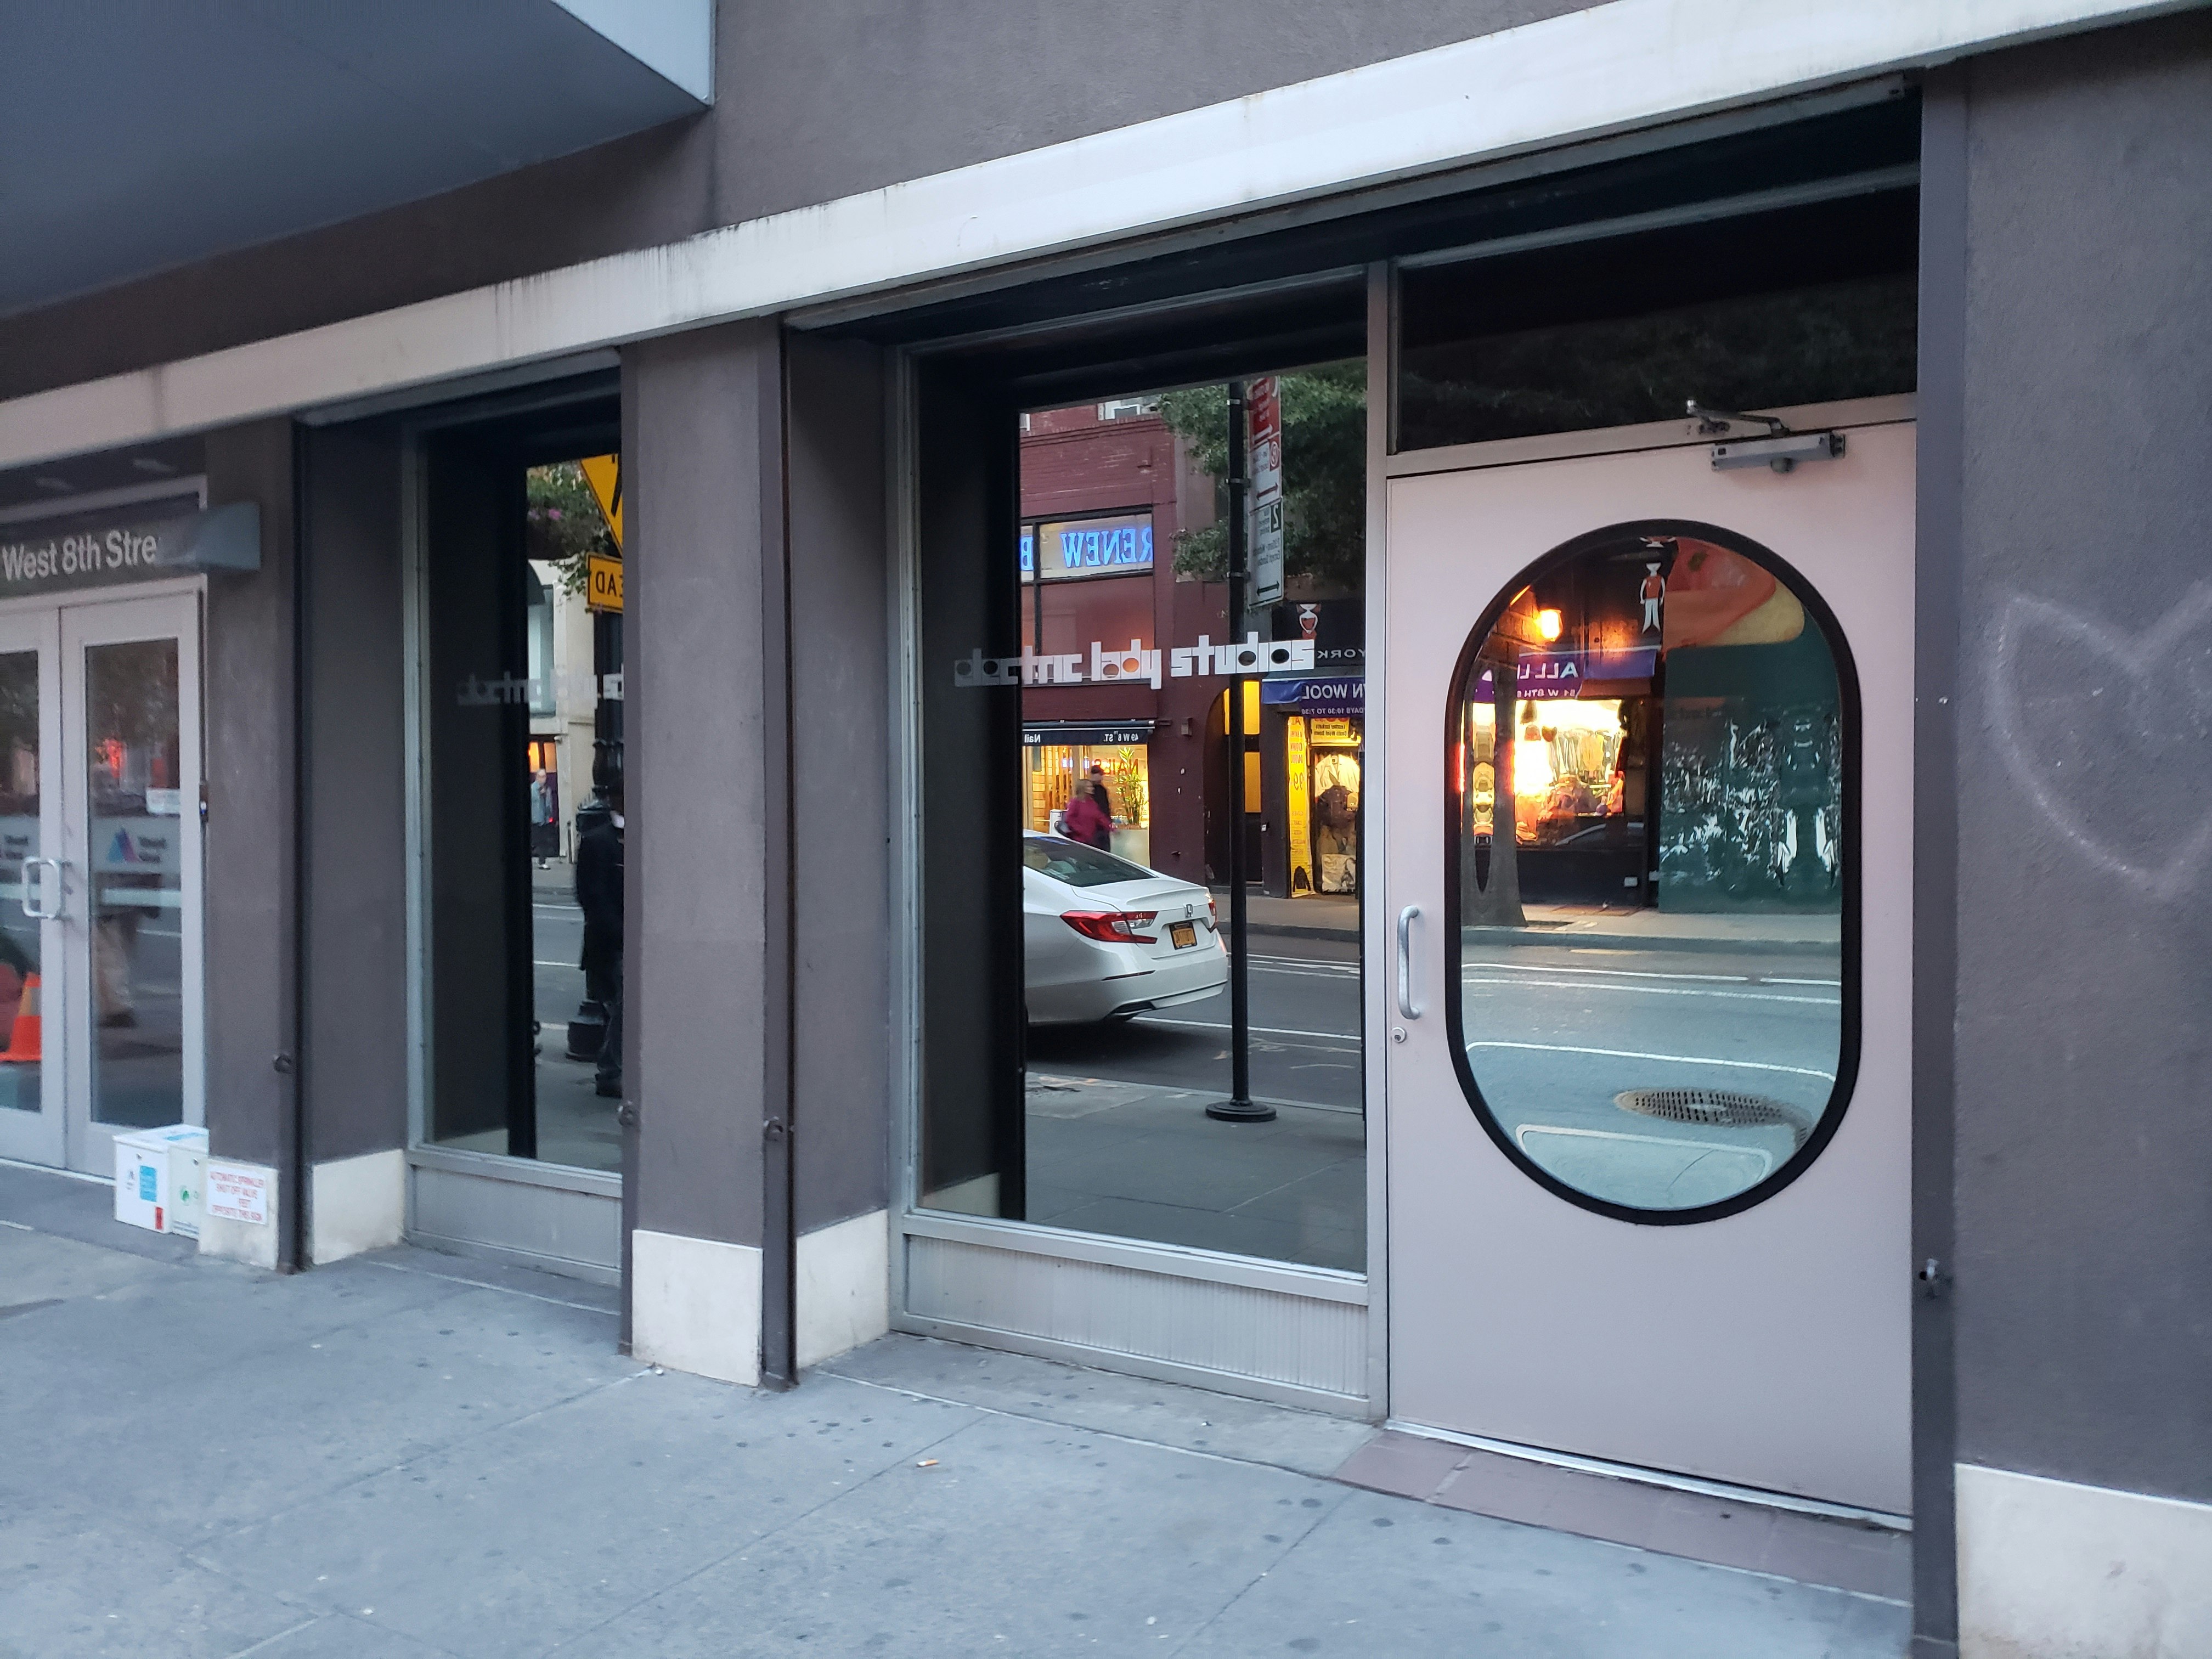 The Electric Lady Studios exterior entrance is quite unassuming, with a swinging door with an ovular, mirror-reflective window in a light purple tone with a sign reading "Electric Lady Studios" in a futuristic font